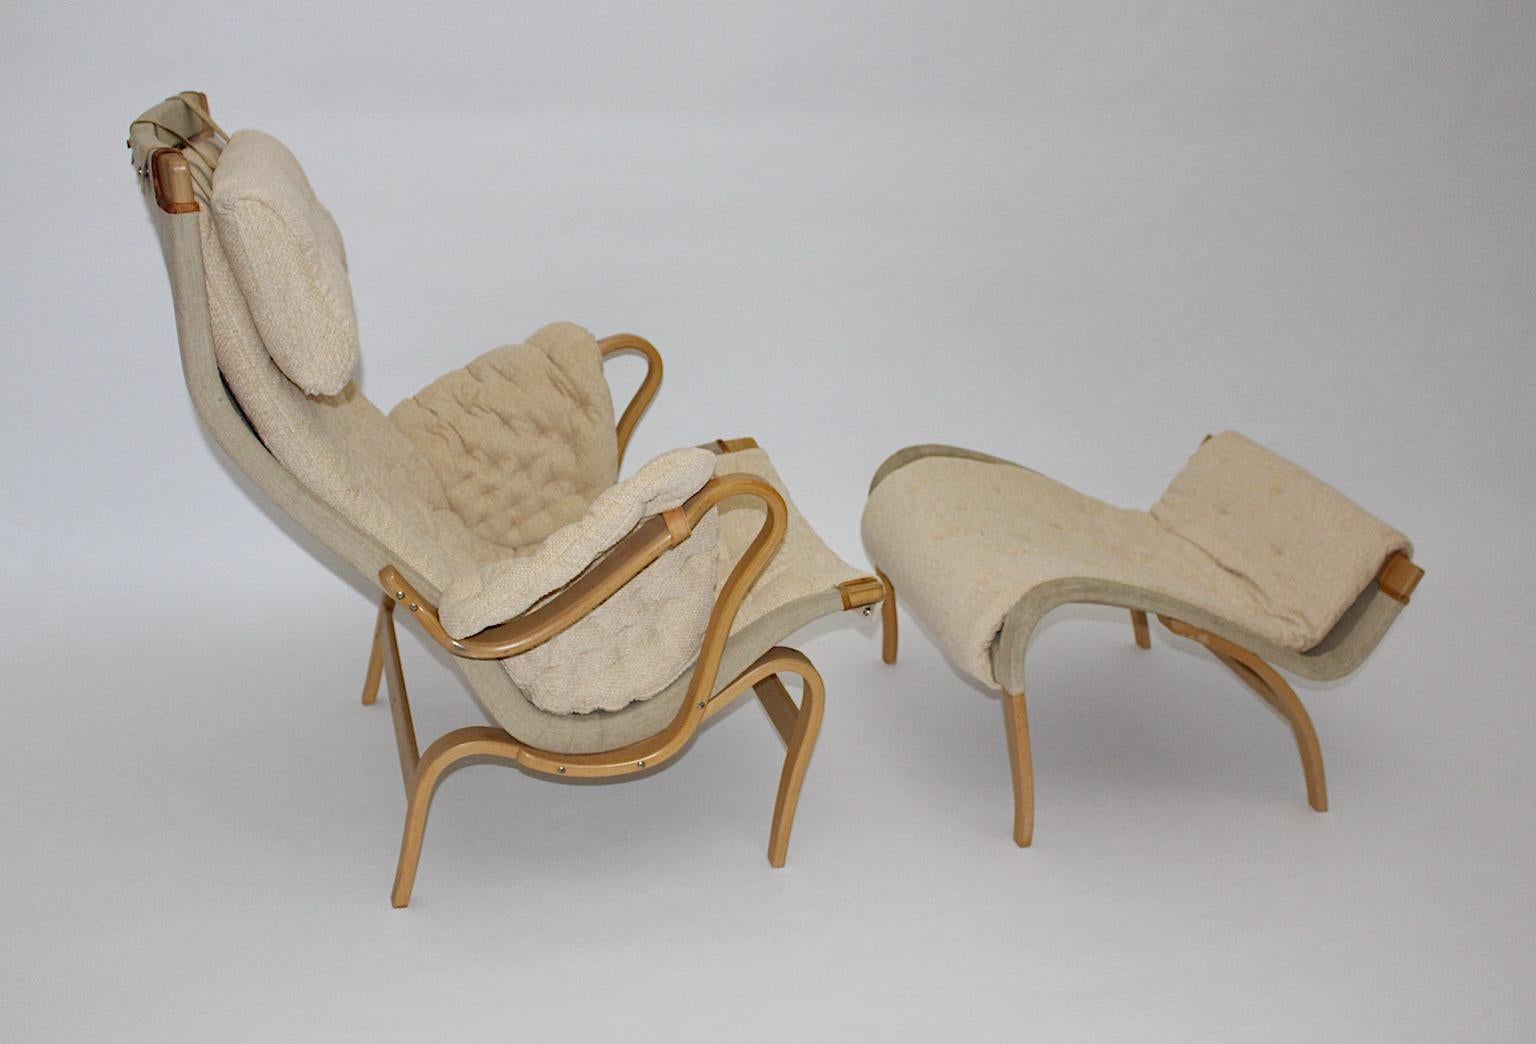 Scandinavian Modern vintage Pernilla lounge chair or easy chair with ottoman from bentwood and fabric in butter cream color by Bruno Mathsson for Dux, 1970s.
Iconic lounge chair model Pernilla with original canvas shows reupholstered tufted